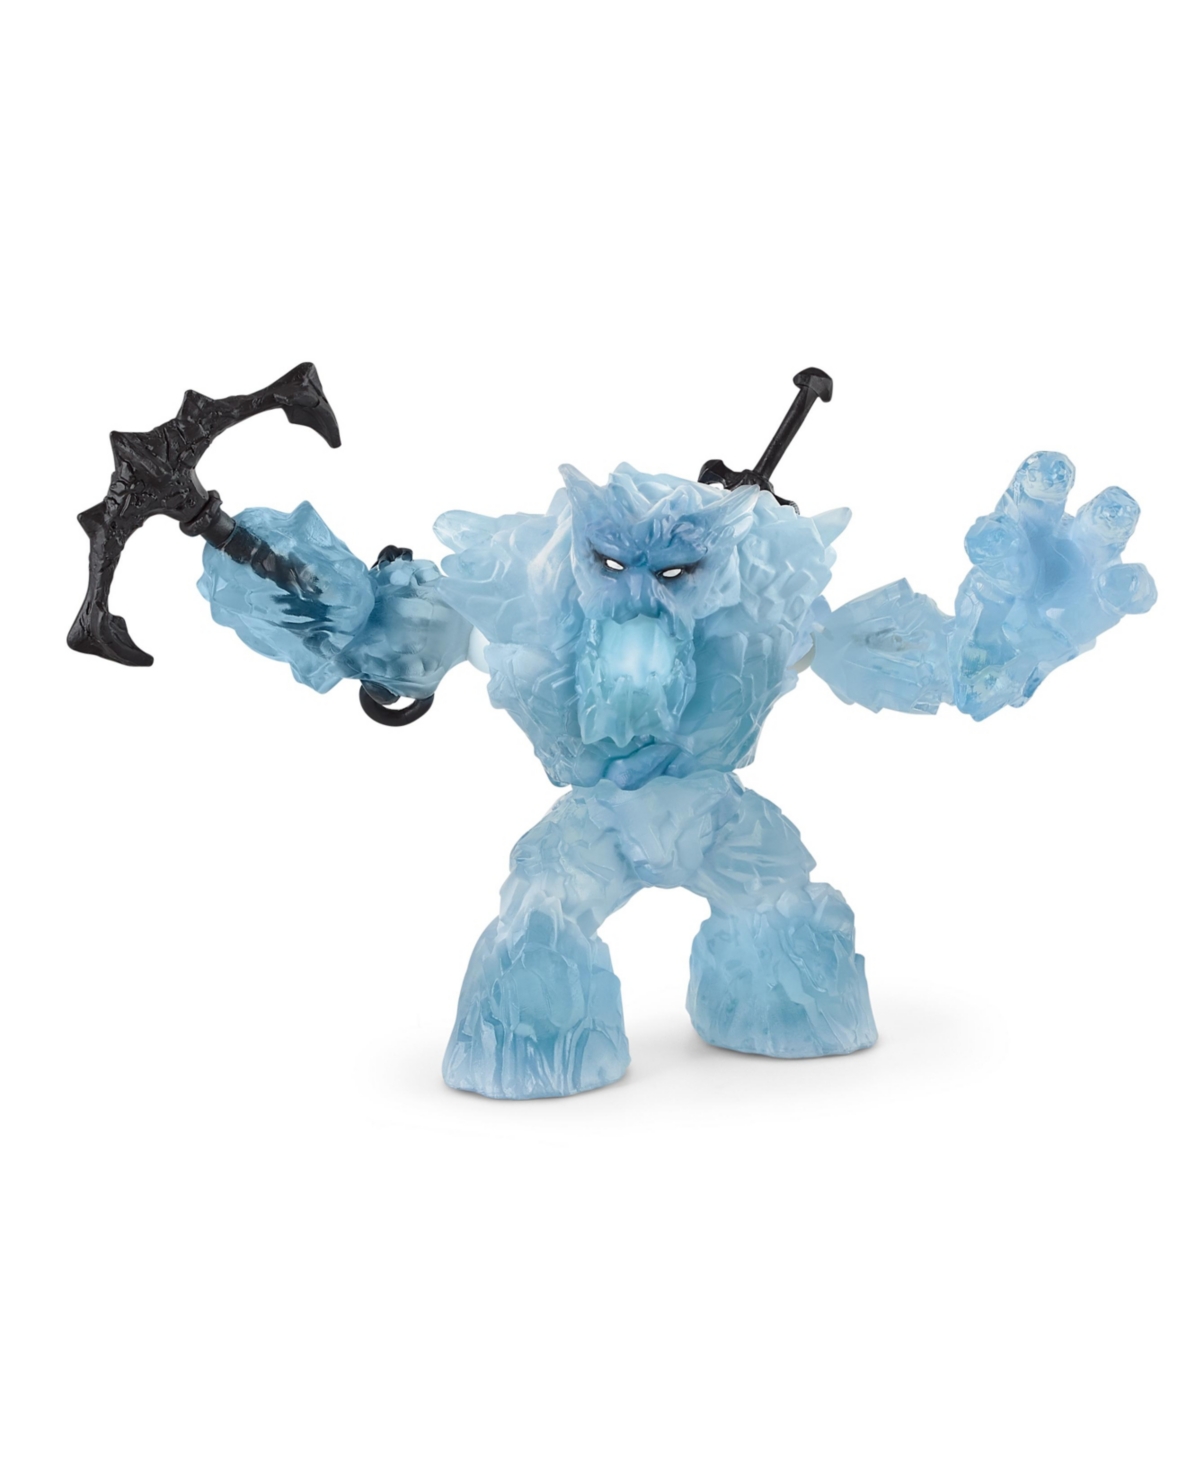 Schleich Kids' Eldrador Creatures Ice Monster Mythical Toy In Multi Color